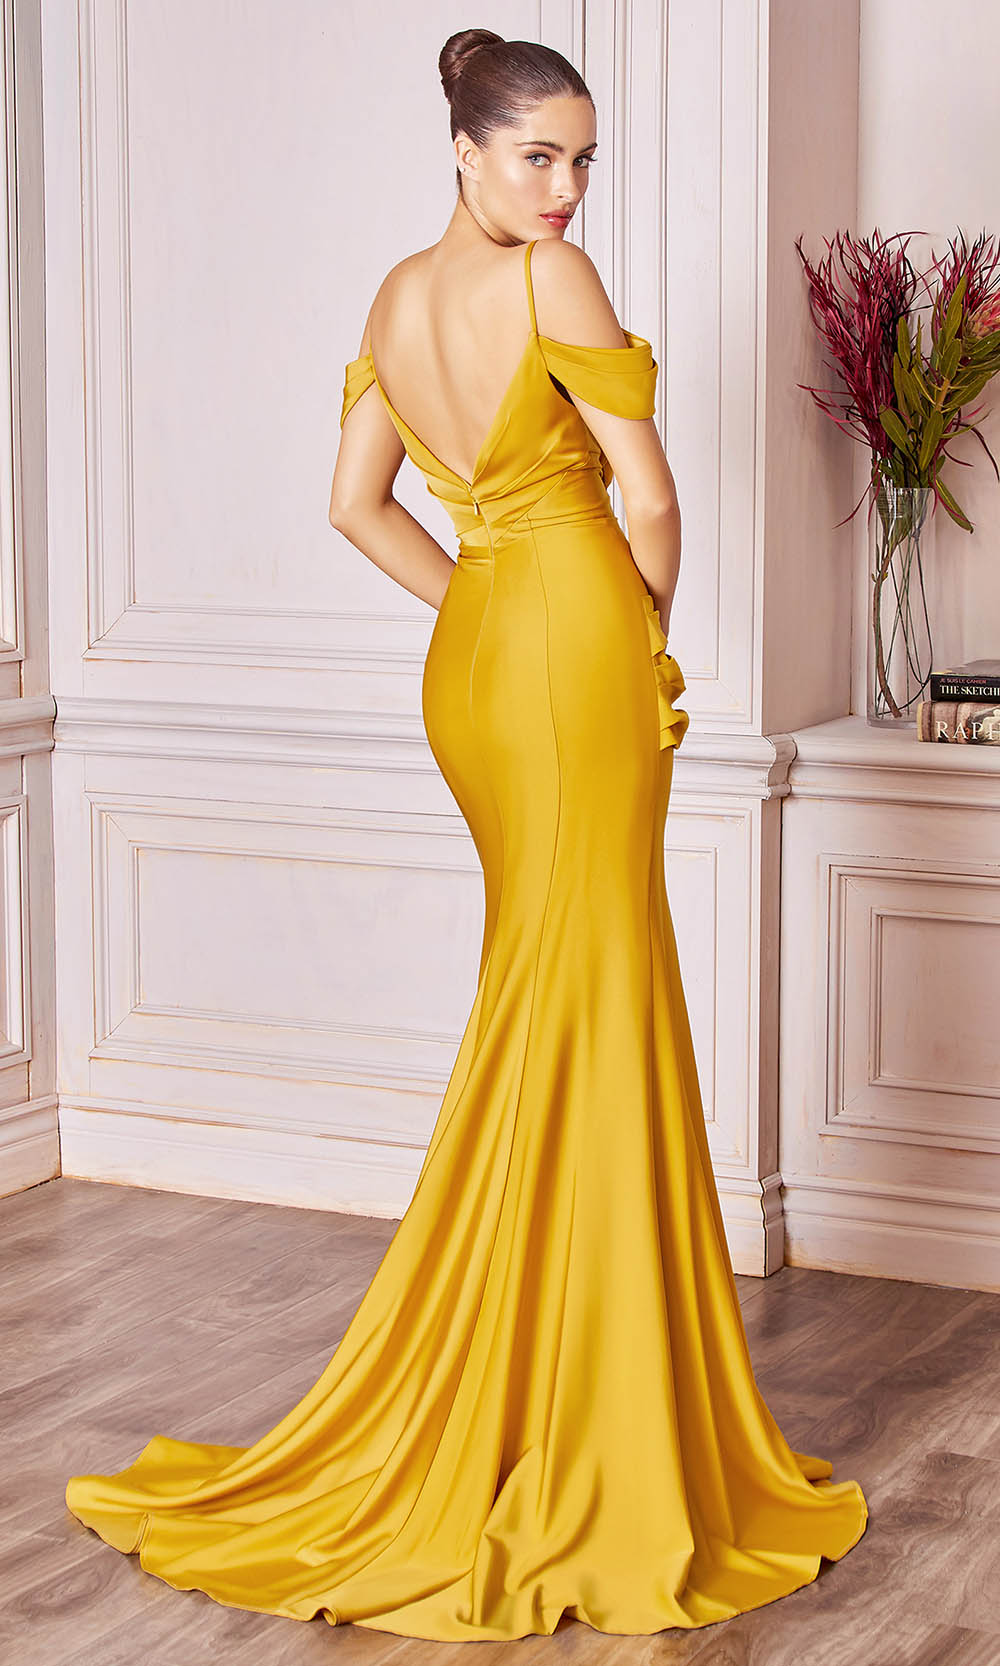 Ladivine - CD942 Cold Shoulder High Slit Sheath Gown In Yellow